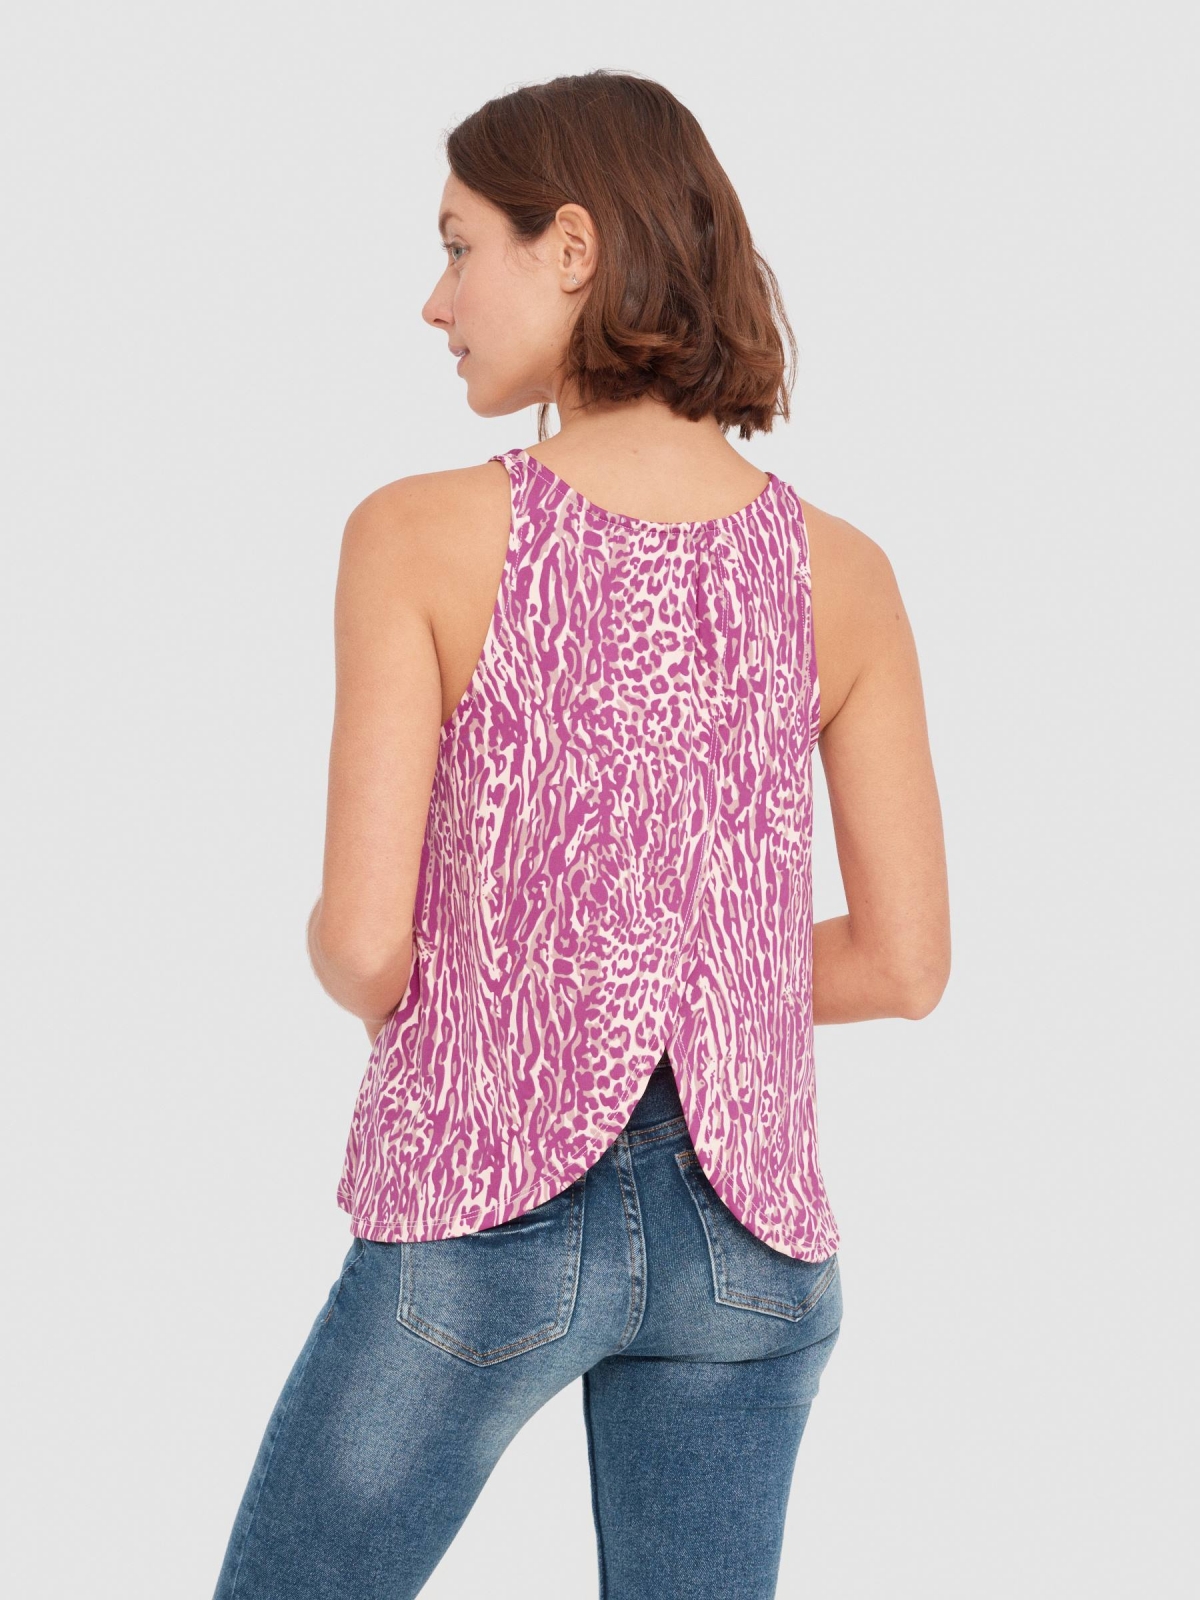 Flowing cross back t-shirt fuchsia middle back view